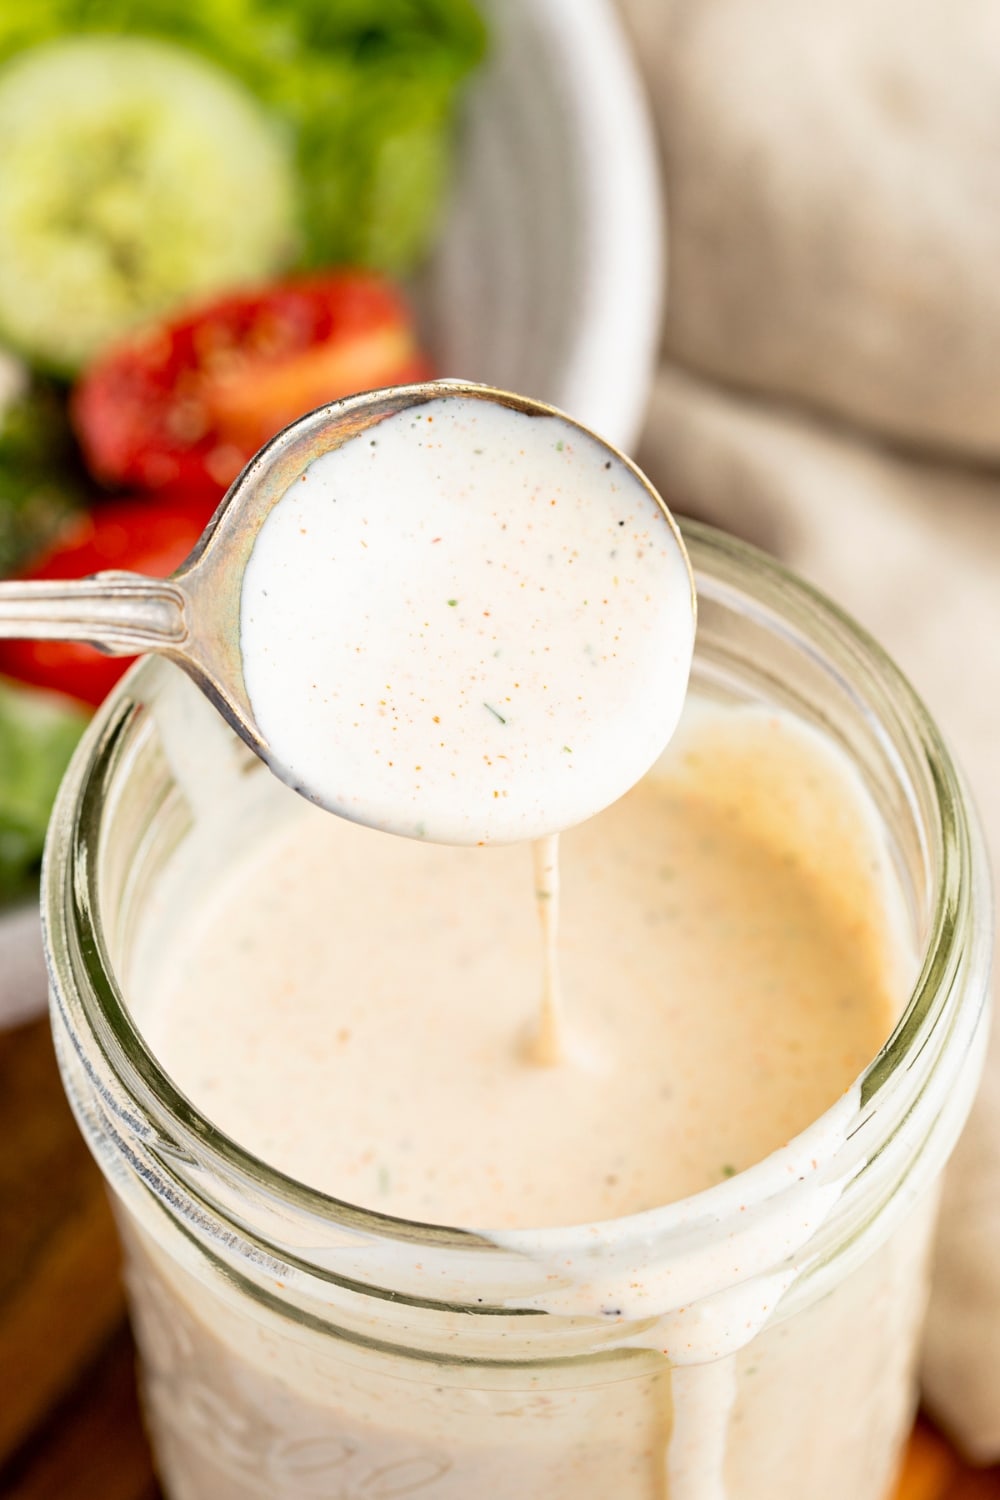 Ranch Dressing Sauce in a Jar Dripping from a Spoon, A Bowl of Salad in the  Background